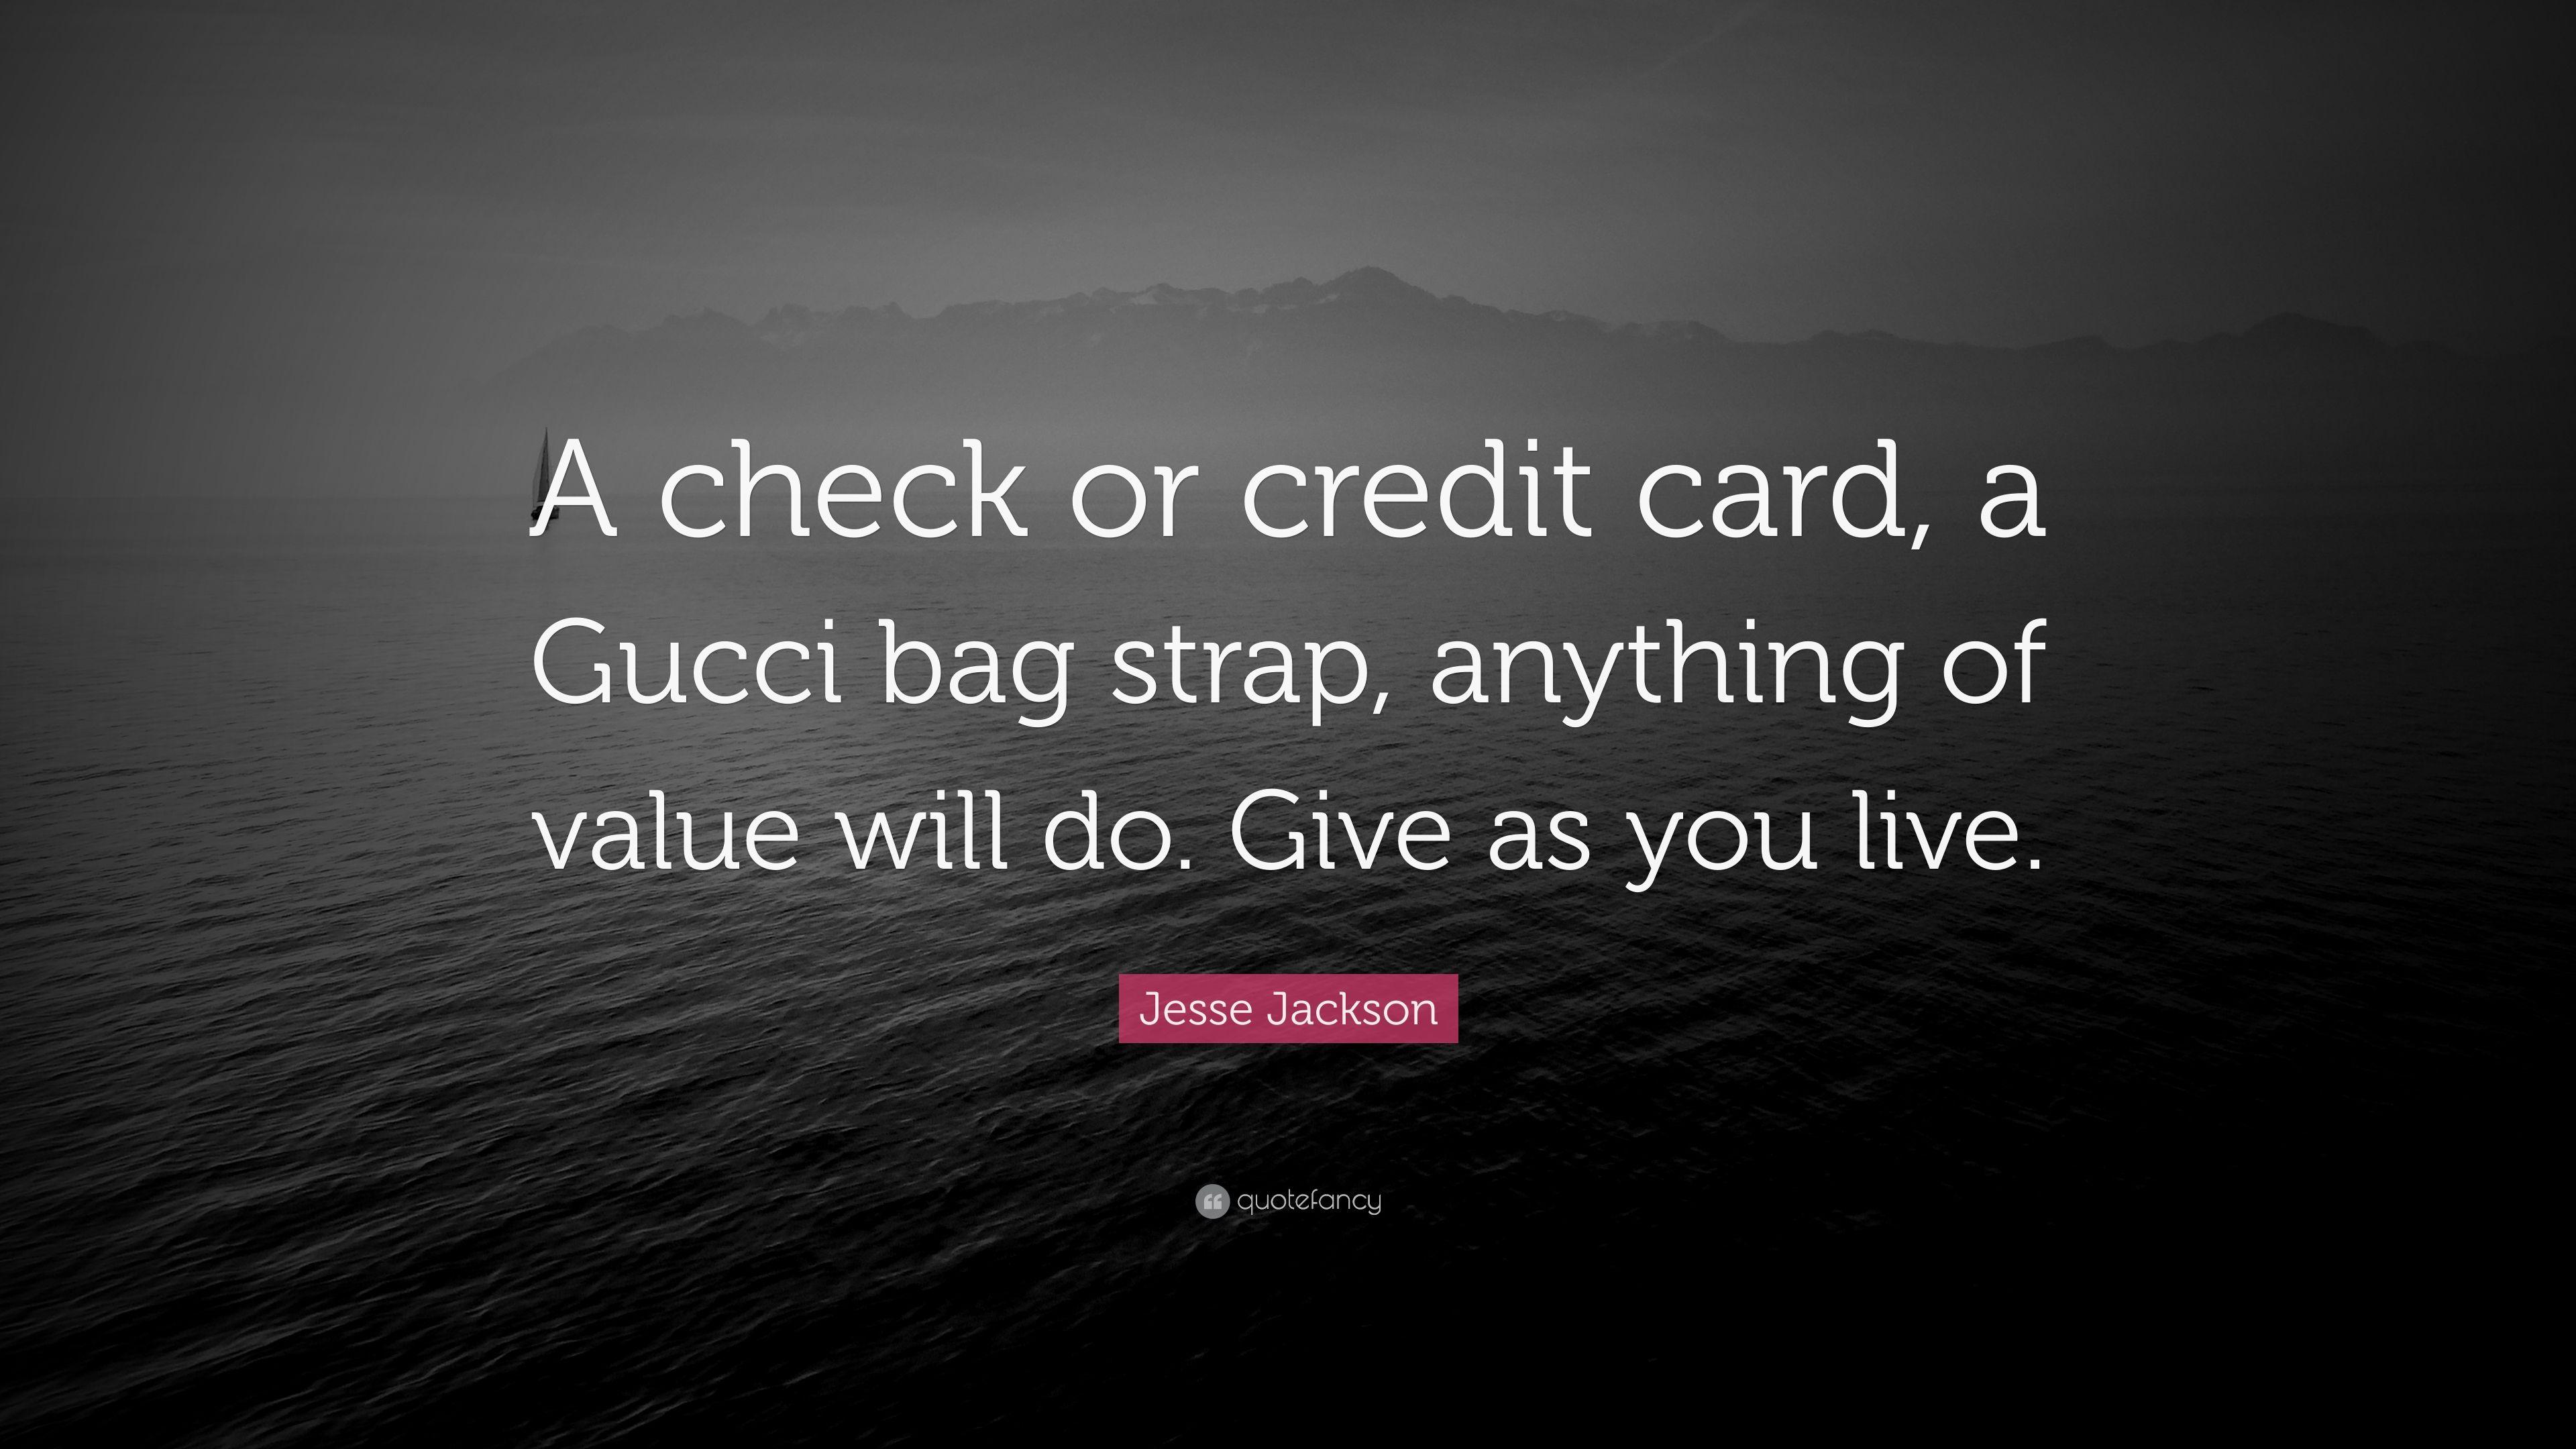 Jesse Jackson Quote: “A check or credit card, a Gucci bag